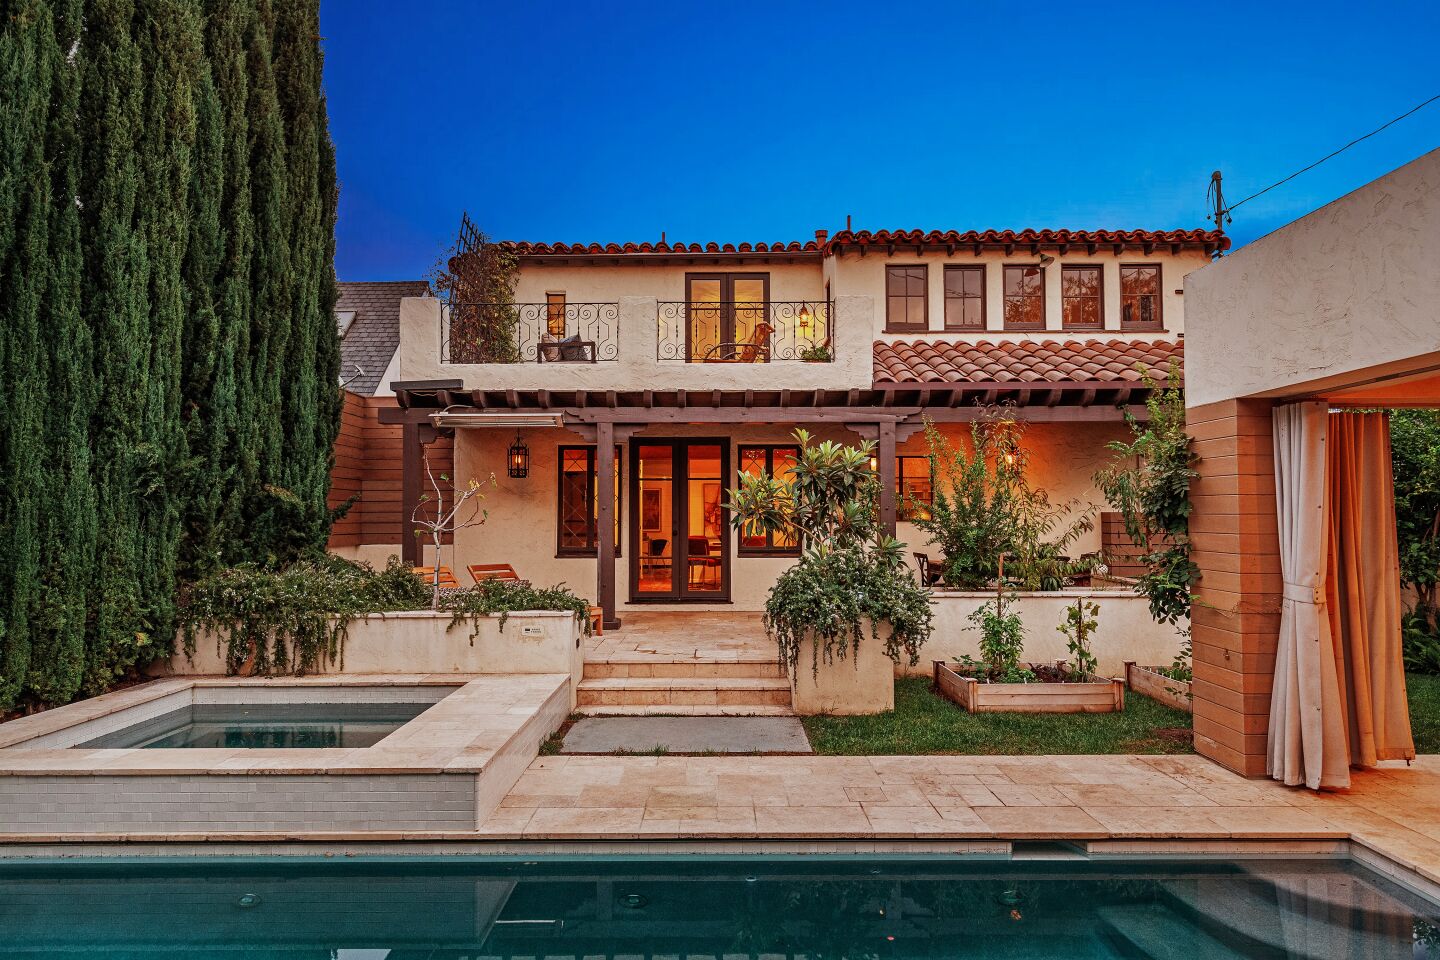 The Spanish Colonial-style home boasts charming outdoor spaces including a landscaped courtyard and a backyard with a pool and movie screen surrounded by fruit trees.